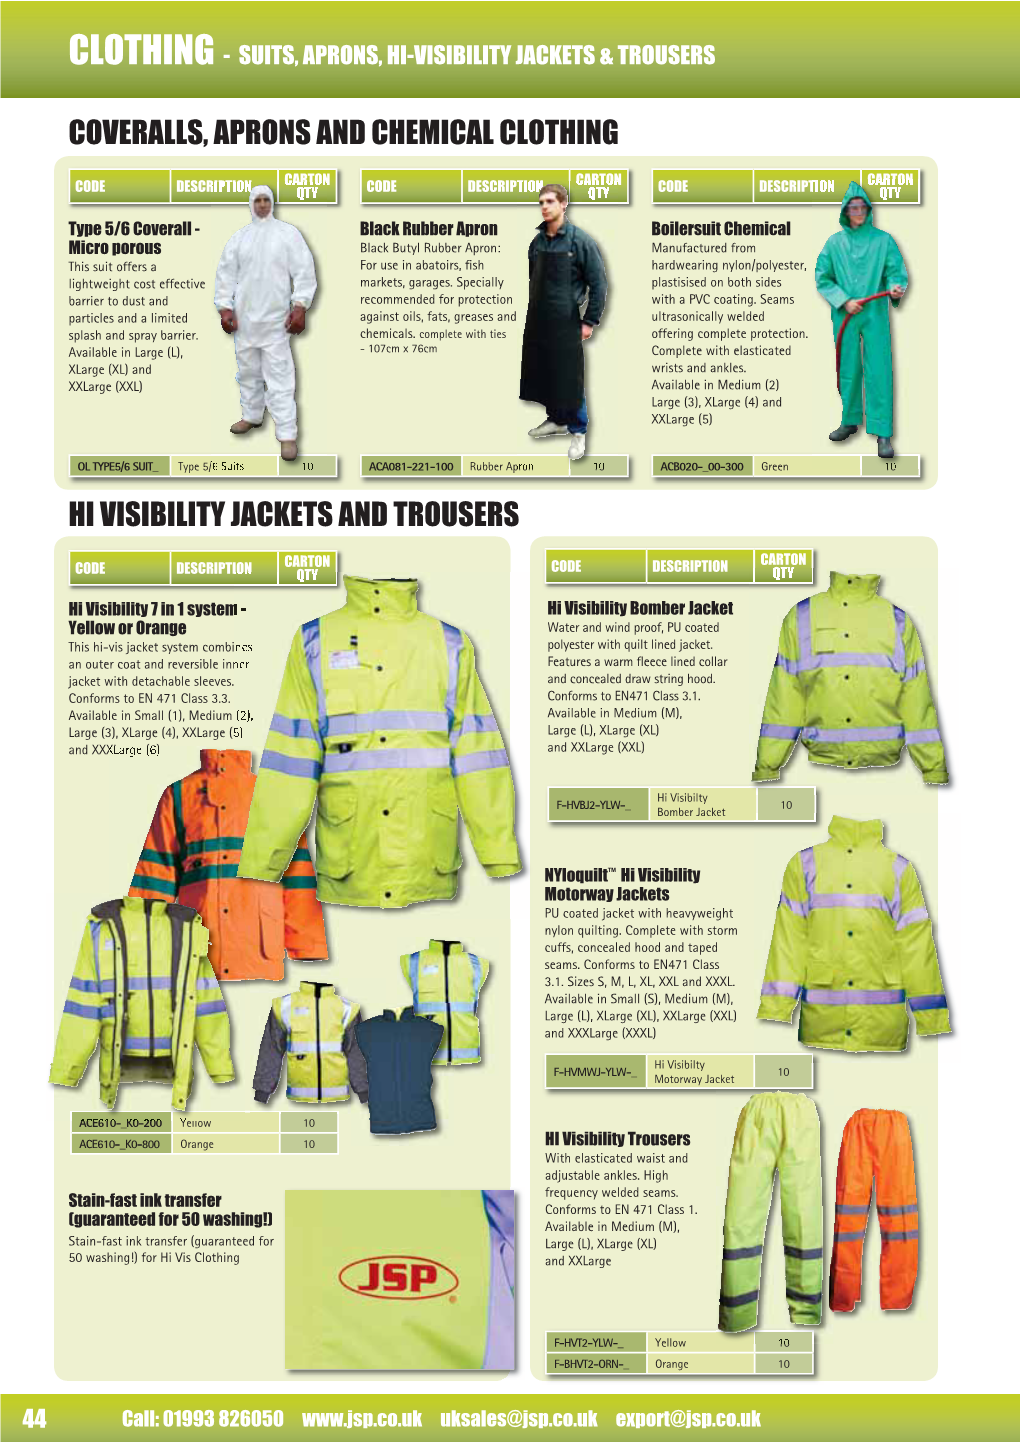 Clothing - Suits, Aprons, Hi-Visibility Jackets & Trousers